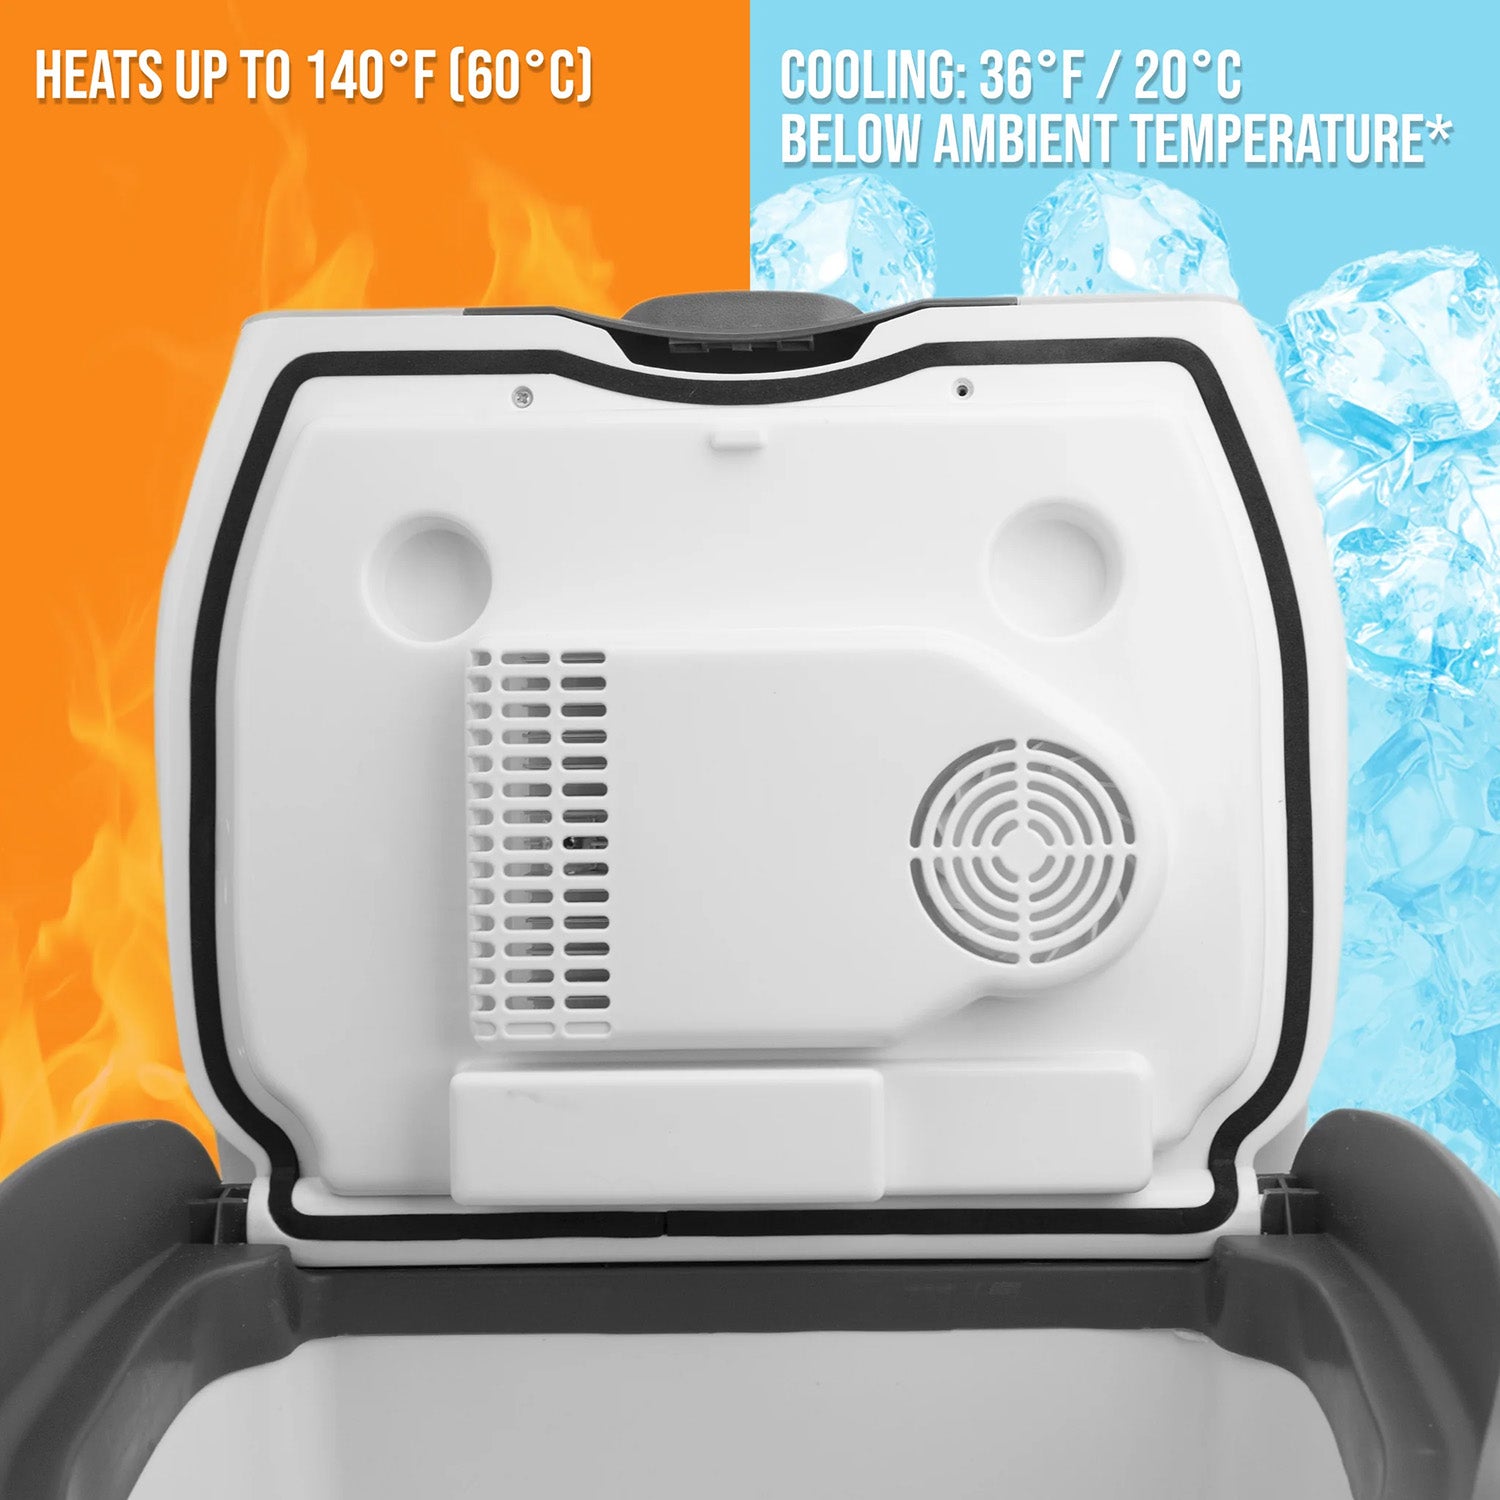 The Wagan 24 Liter Personal Fridge/Warmer Heats Up To 140 Degrees Fahrenheit and Cools Down To 36 Degrees Fahrenheit